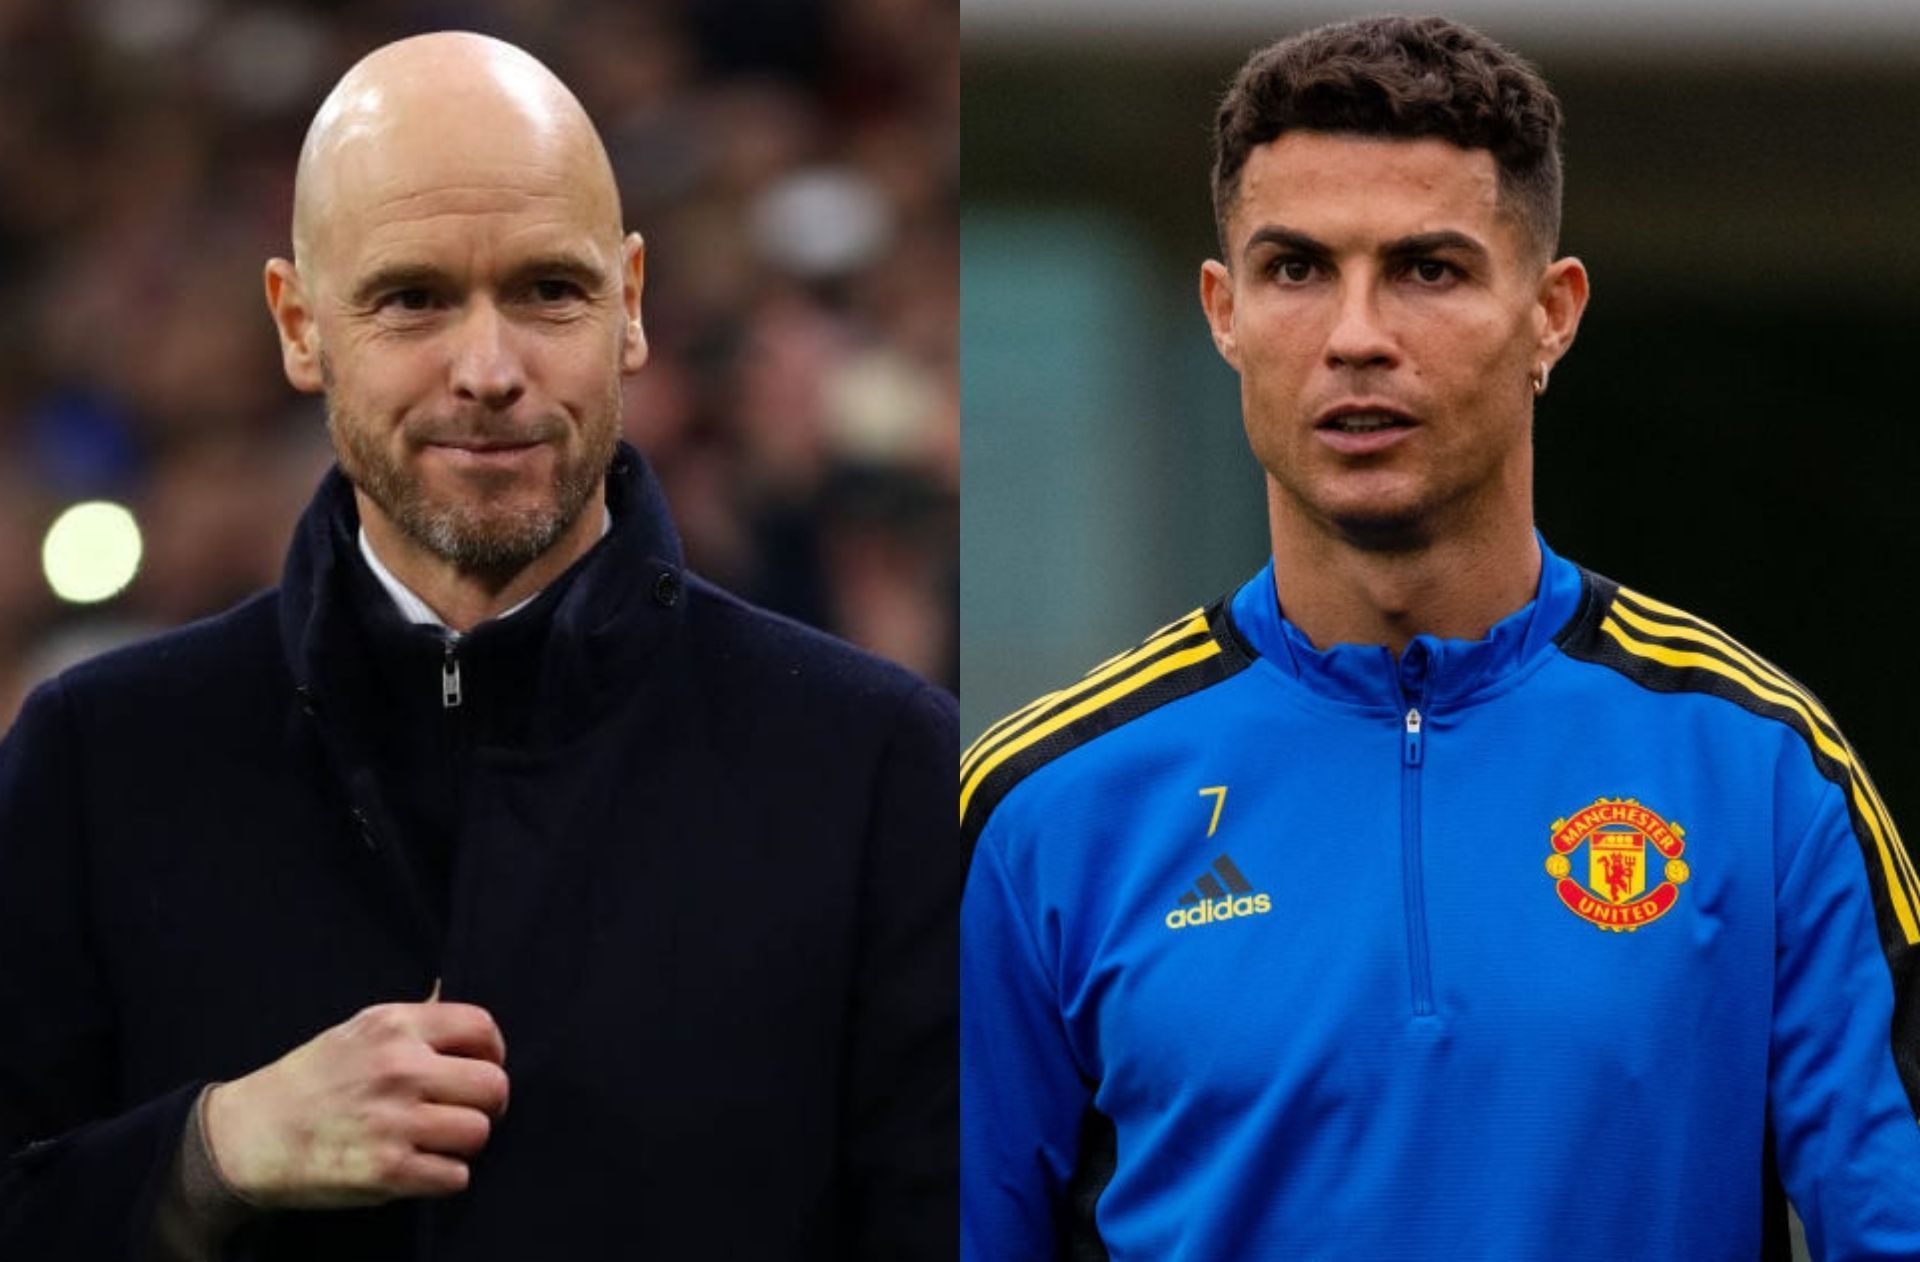 Questions were asked about Ronaldo after Ten Hag&#039;s appointment